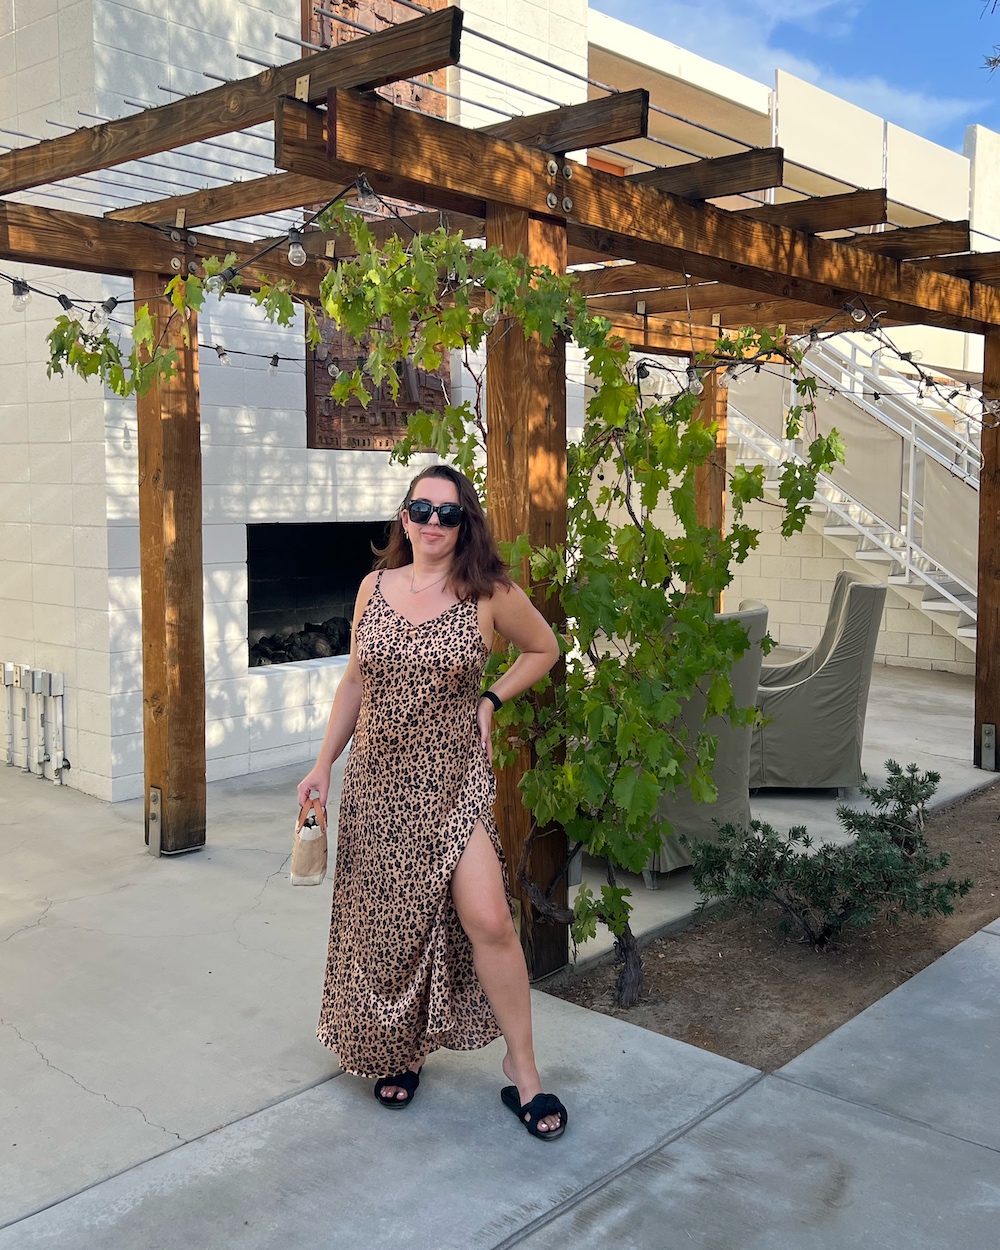 How To Spend 3 Days in Palm Springs - Ace Hotel Palm Springs